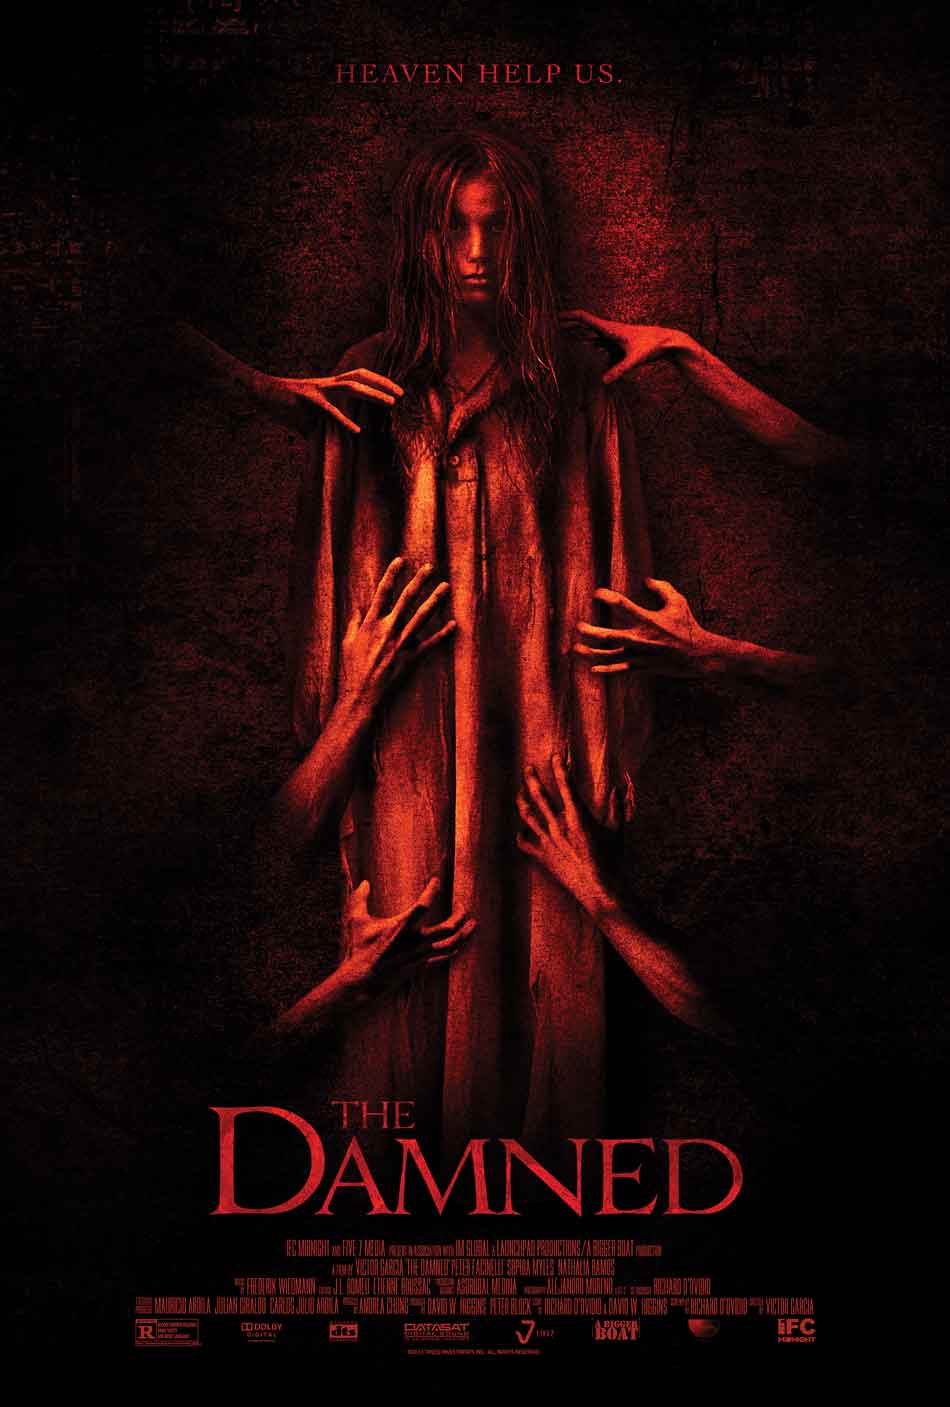 Gallows Hill / The Damned (3/6)